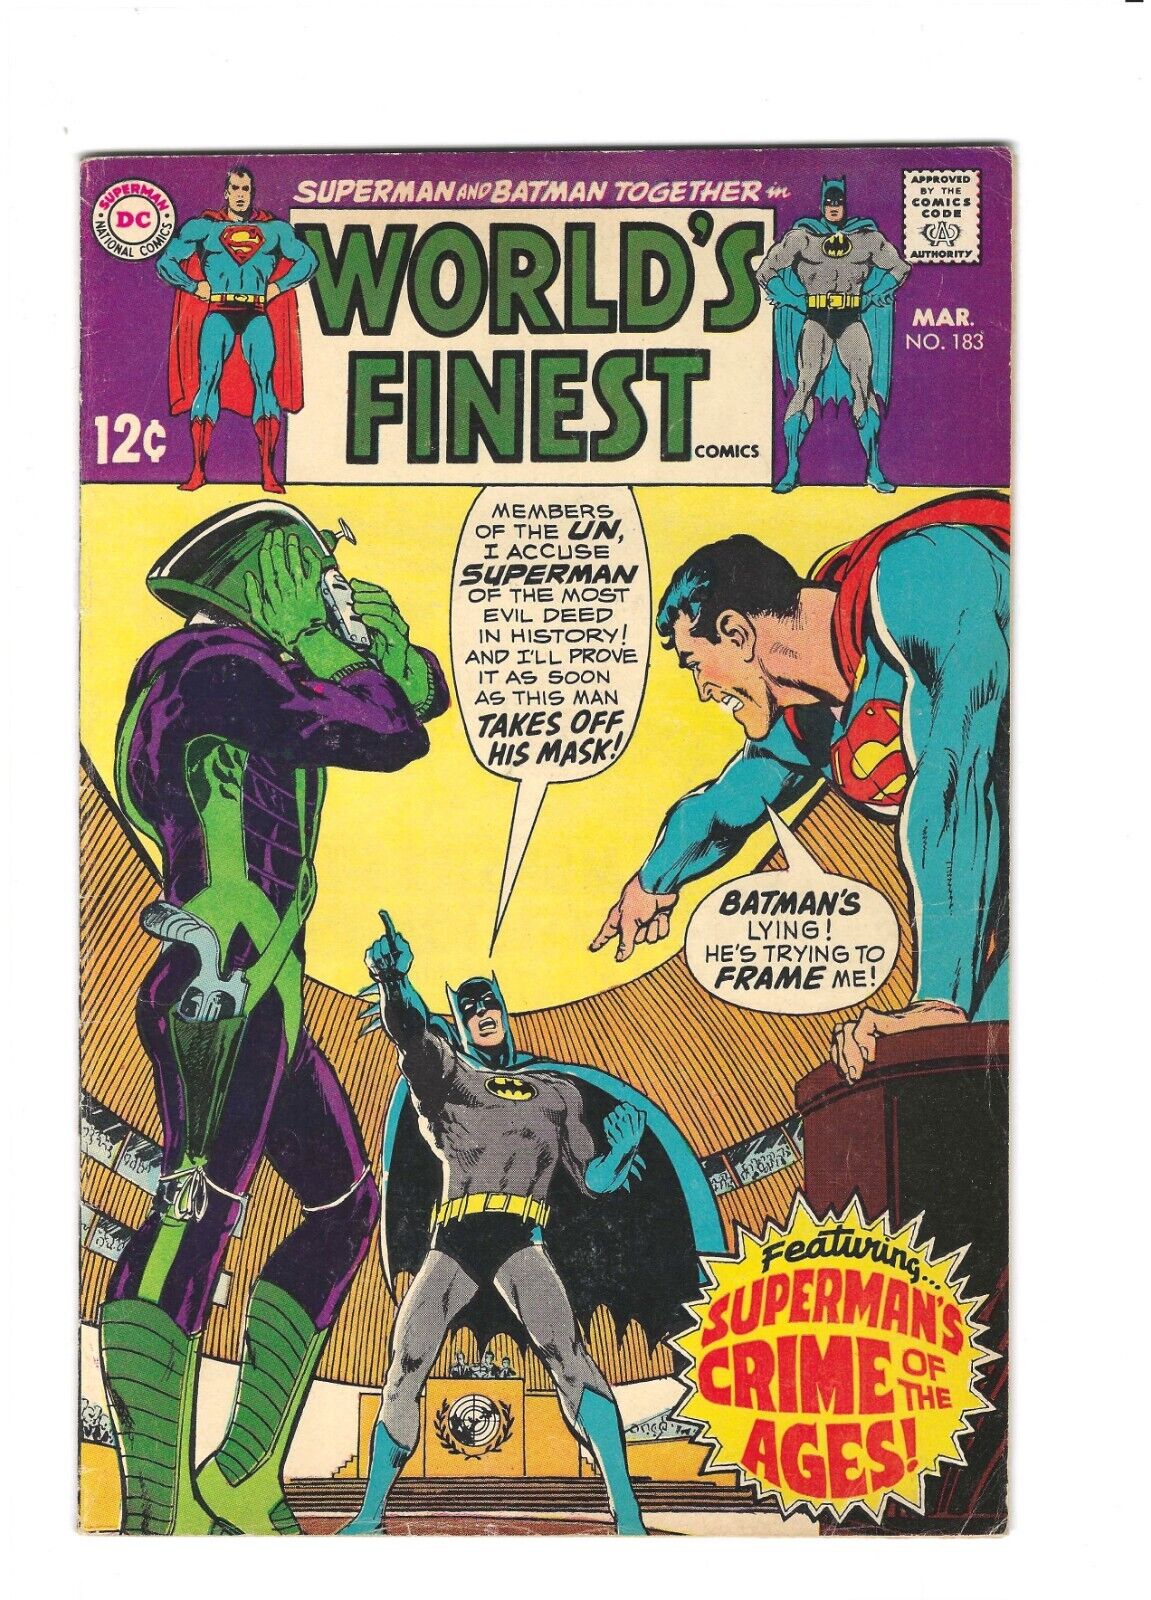 World's Finest #183: Dry Cleaned: Pressed: Scanned: Bagged & Boarded VF 8.0